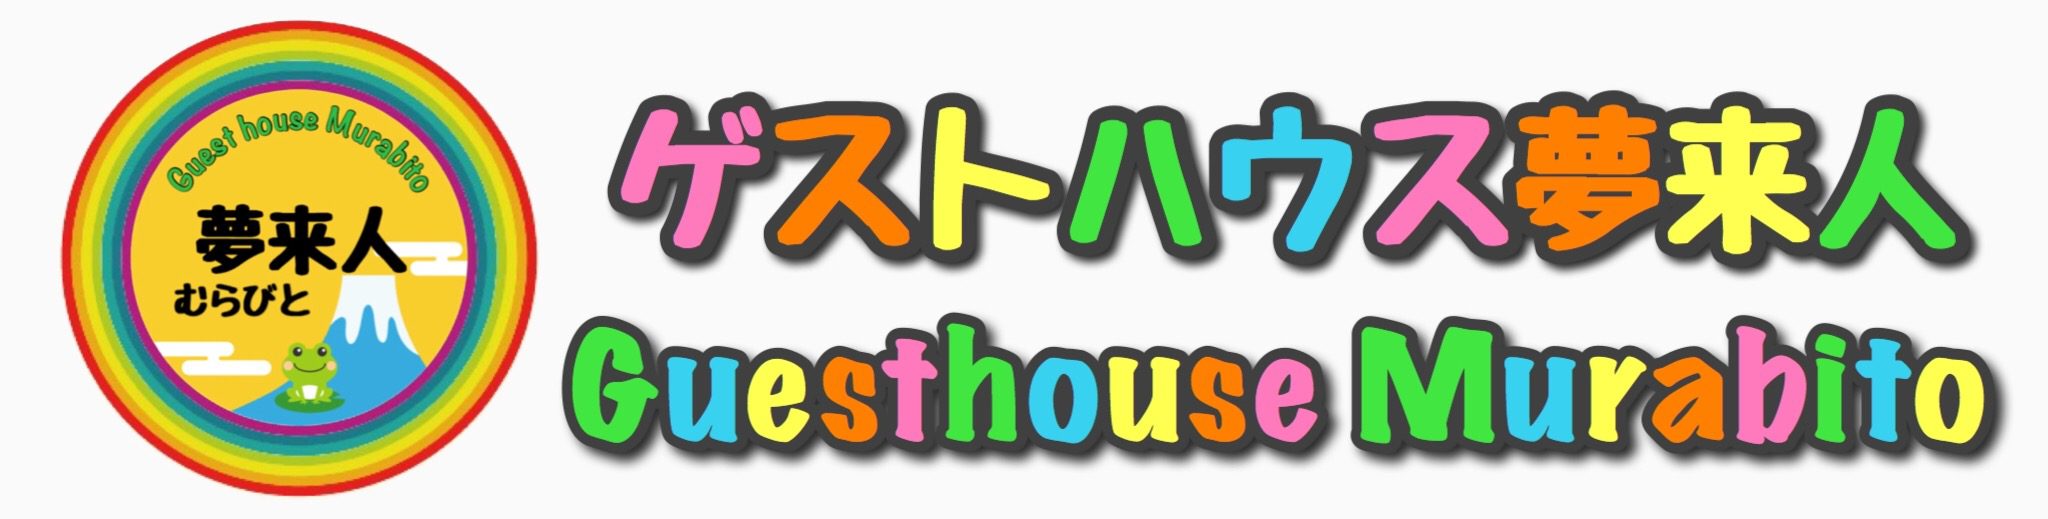 Guesthouse Murabito Official Website / ゲストハウス 夢来人 公式ホームページ